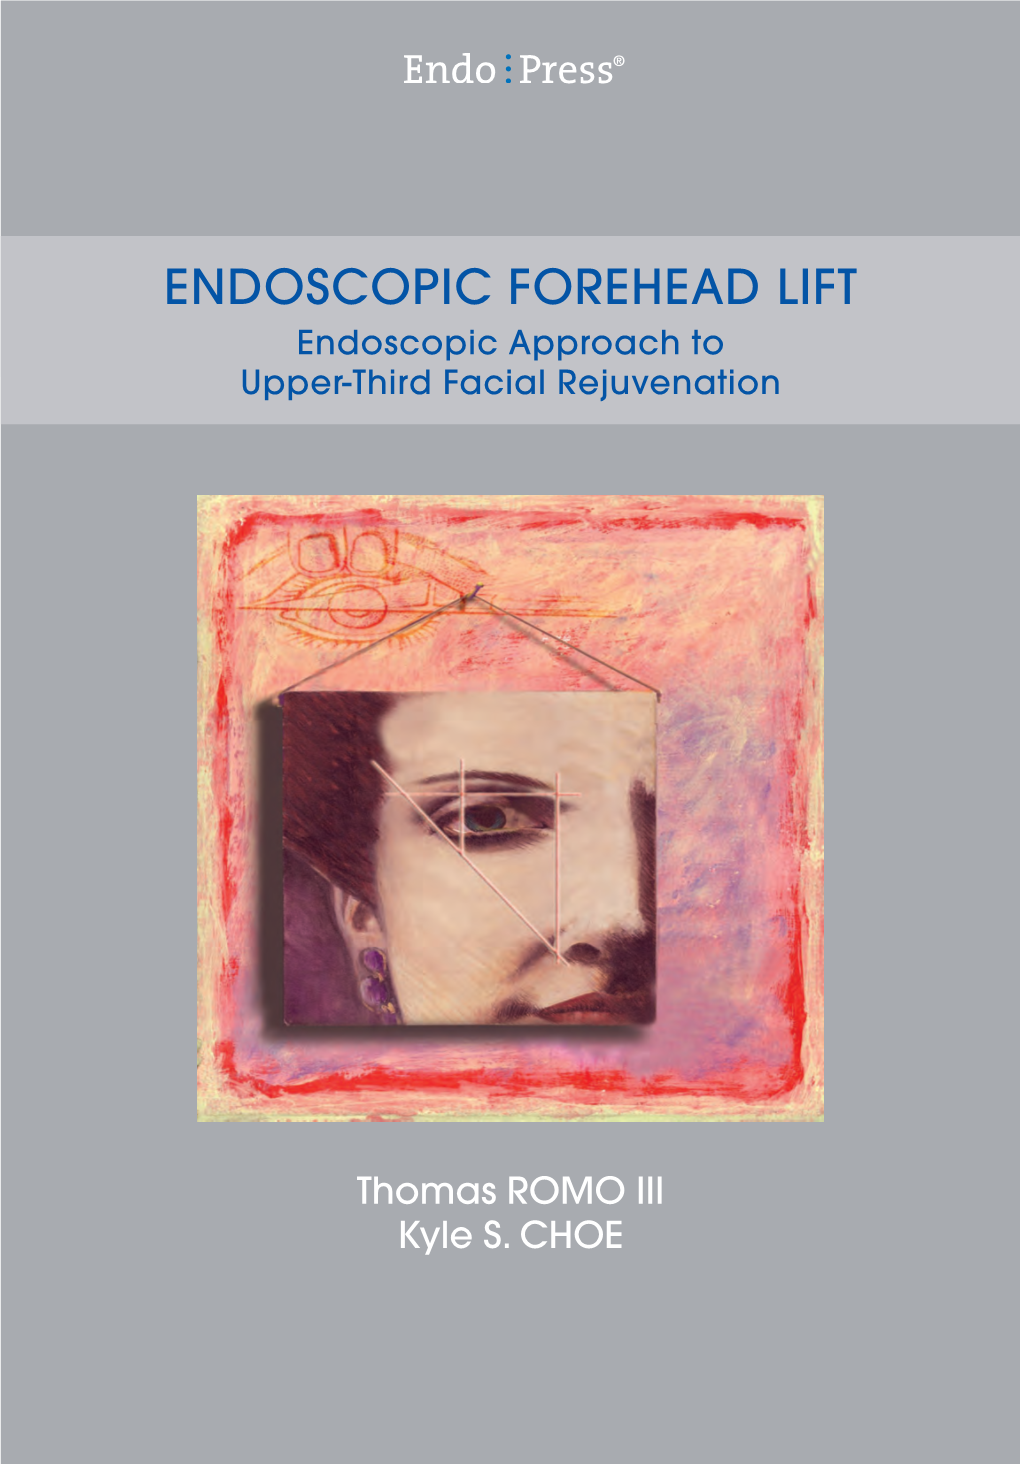 ENDOSCOPIC FOREHEAD LIFT Endoscopic Approach to Upper-Third Facial Rejuvenation